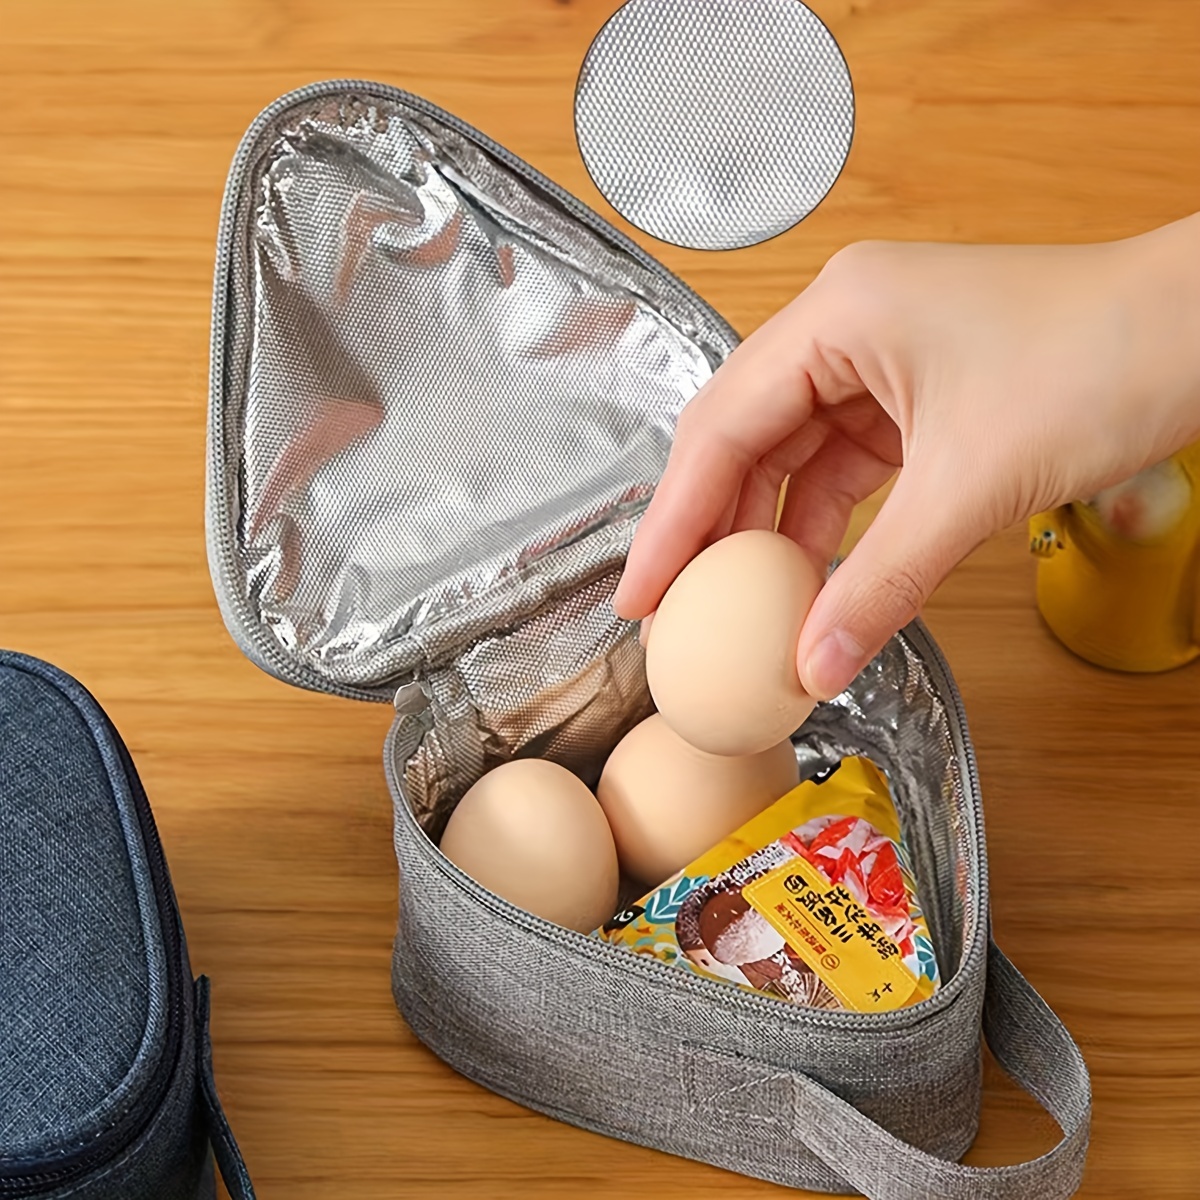 Breakfast Insulation Thermal Bag Mini Triangular Rice Ball Lunch Box Bags  Cute Portable Food Bento Fresh Pouch for Women Kids